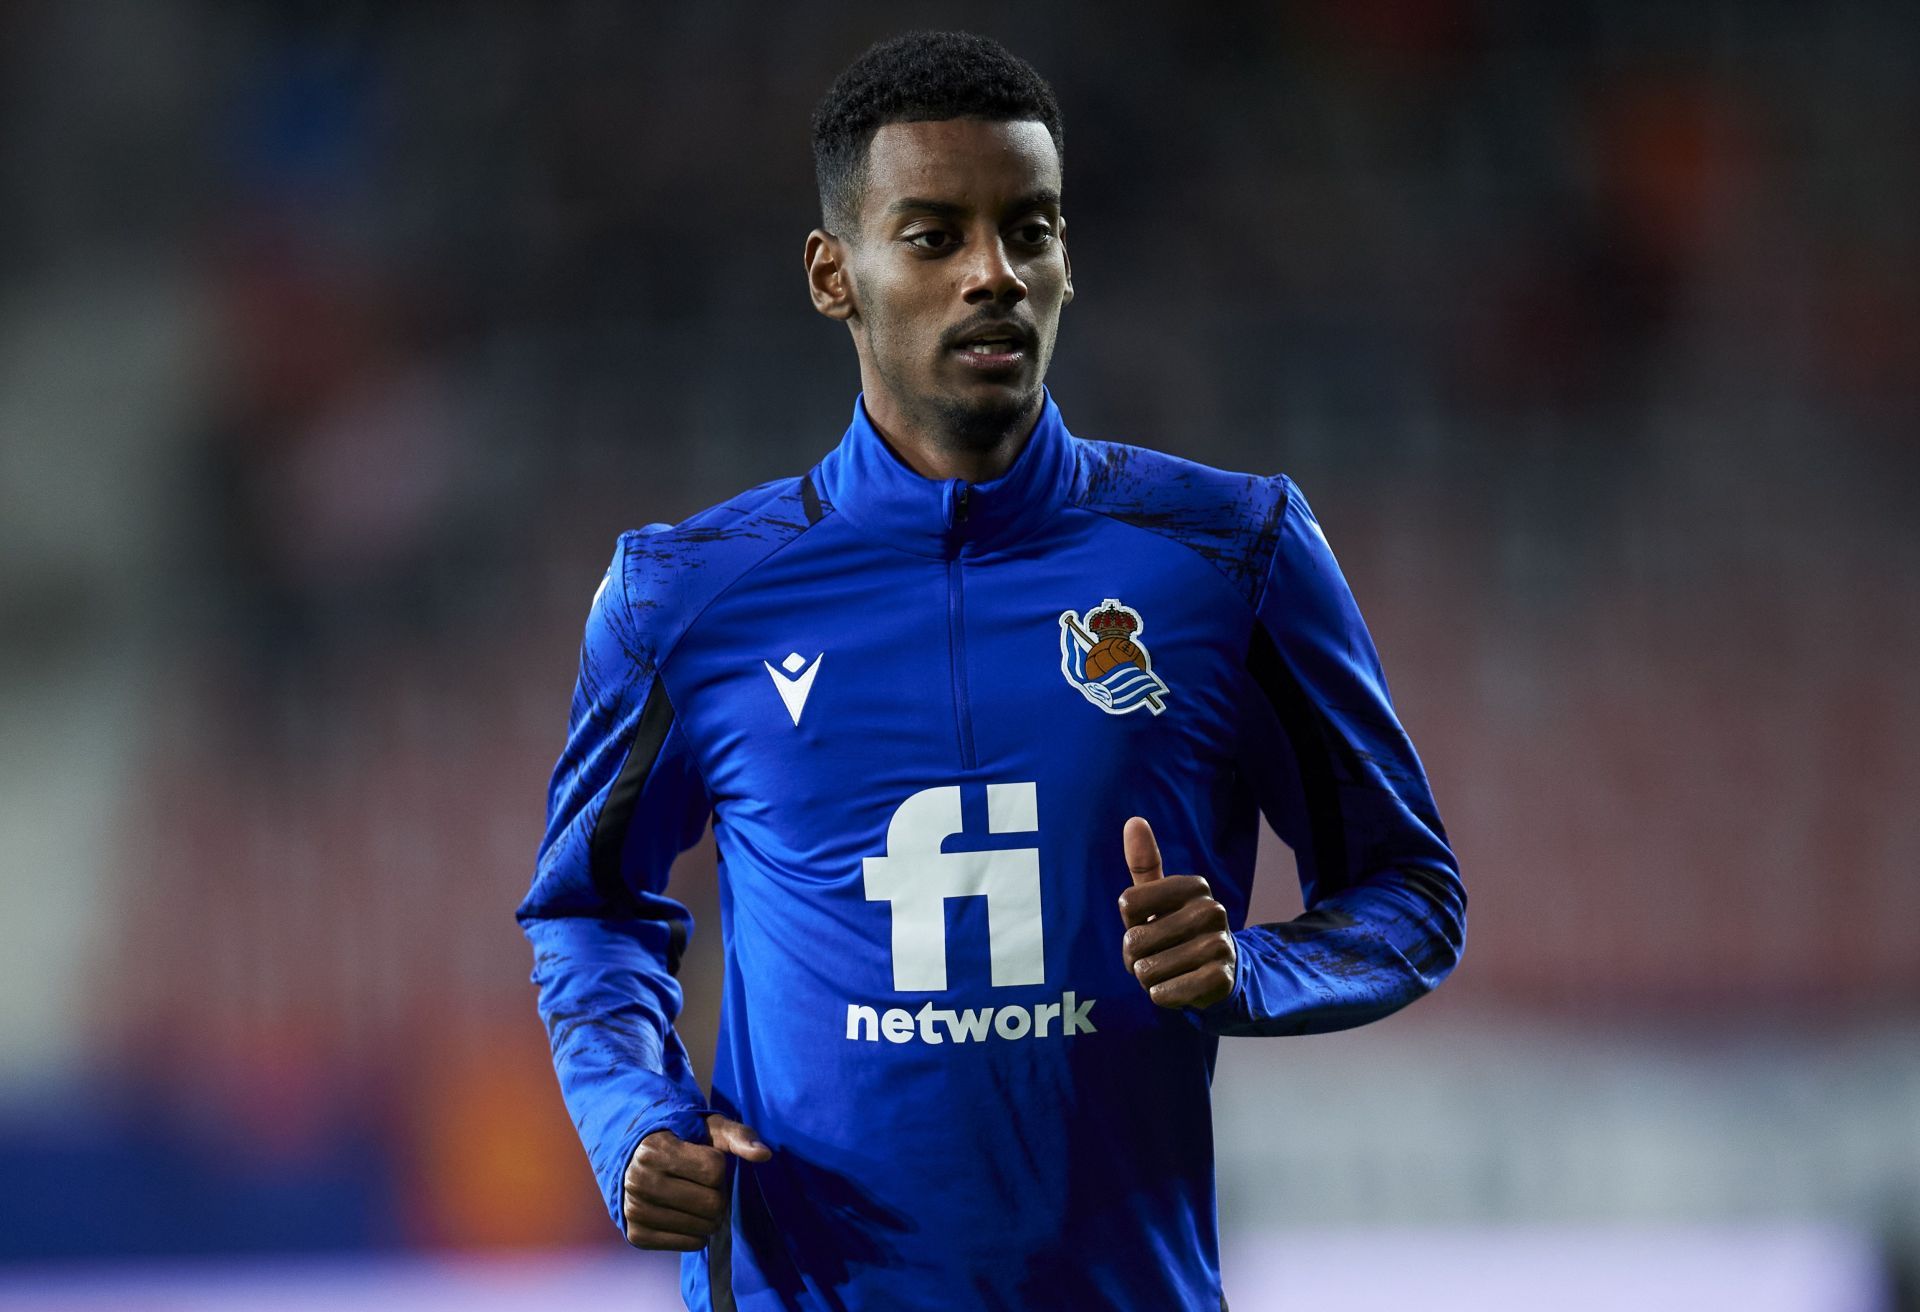 Arsenal submitted a &euro;70 million offer for Alexander Isak in the final hours of transfer deadline day.